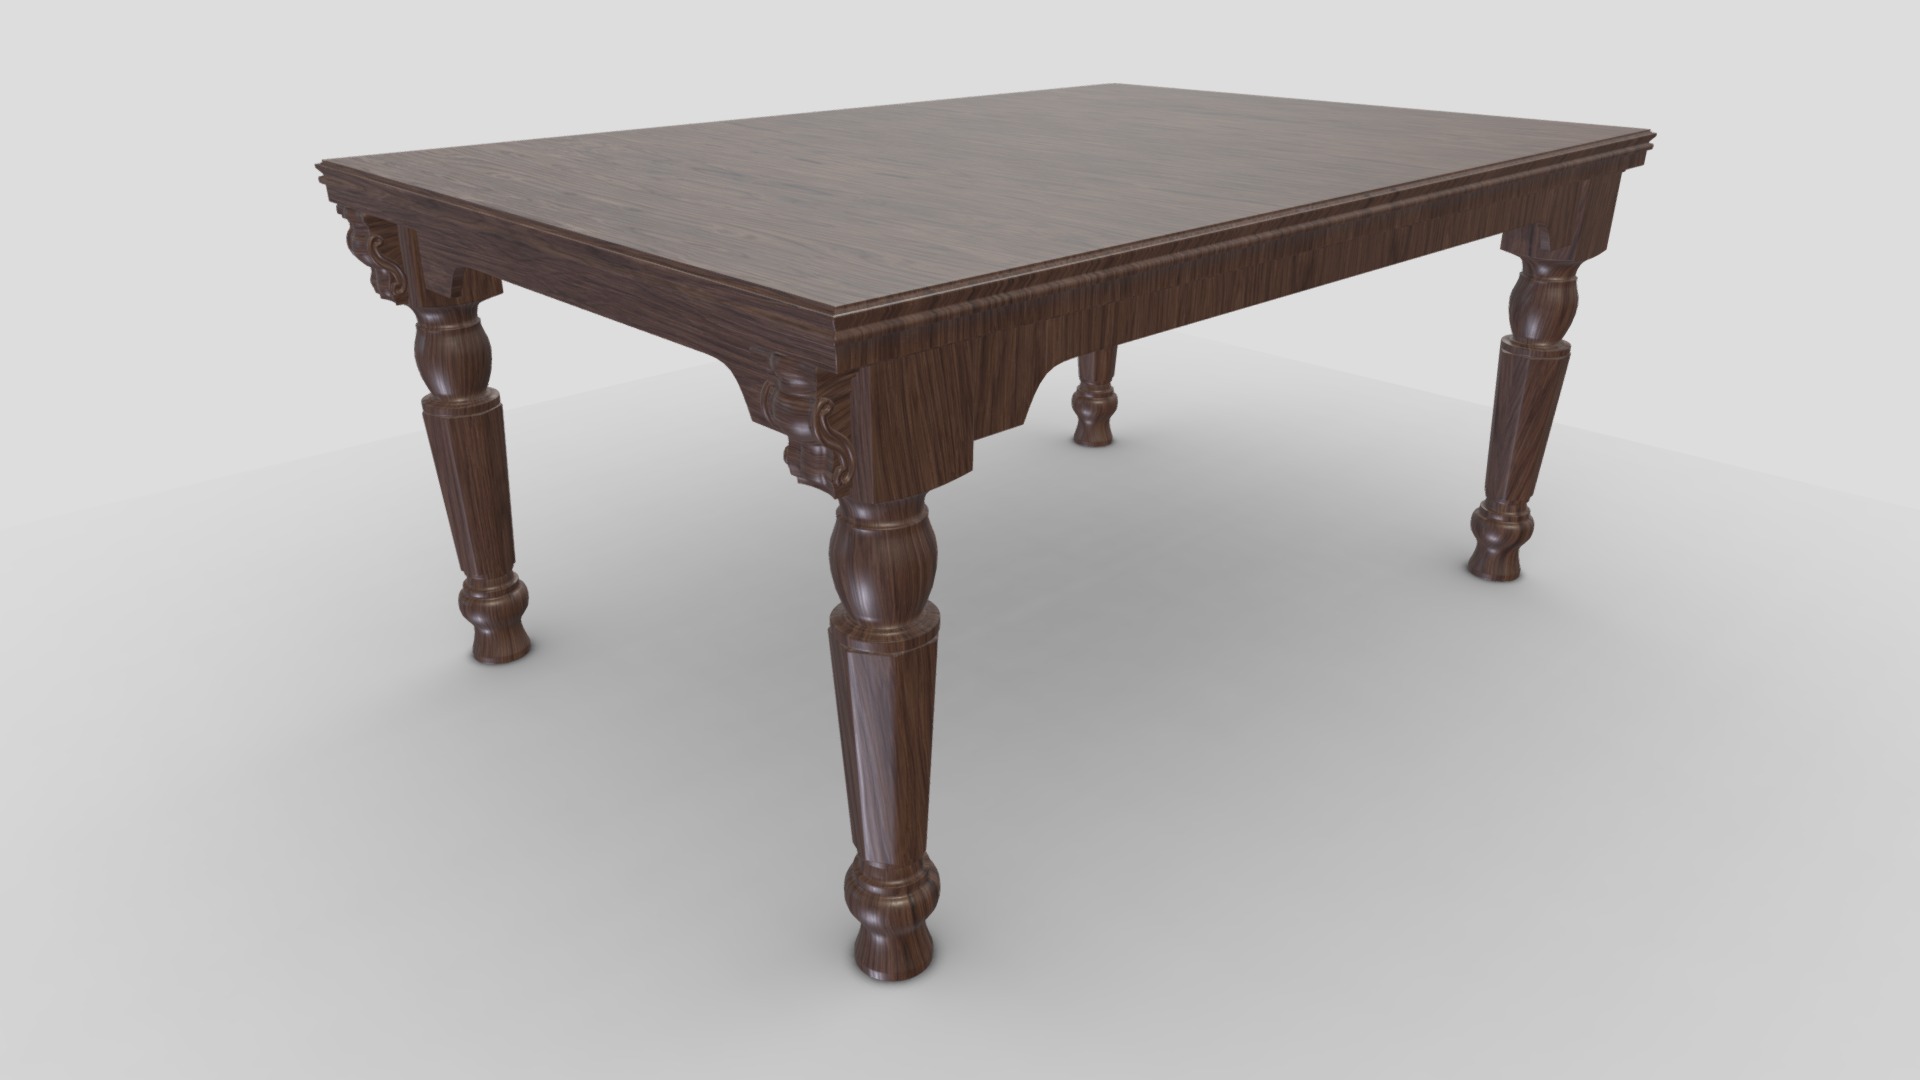 3D model Table 21 - This is a 3D model of the Table 21. The 3D model is about a wooden table with legs.